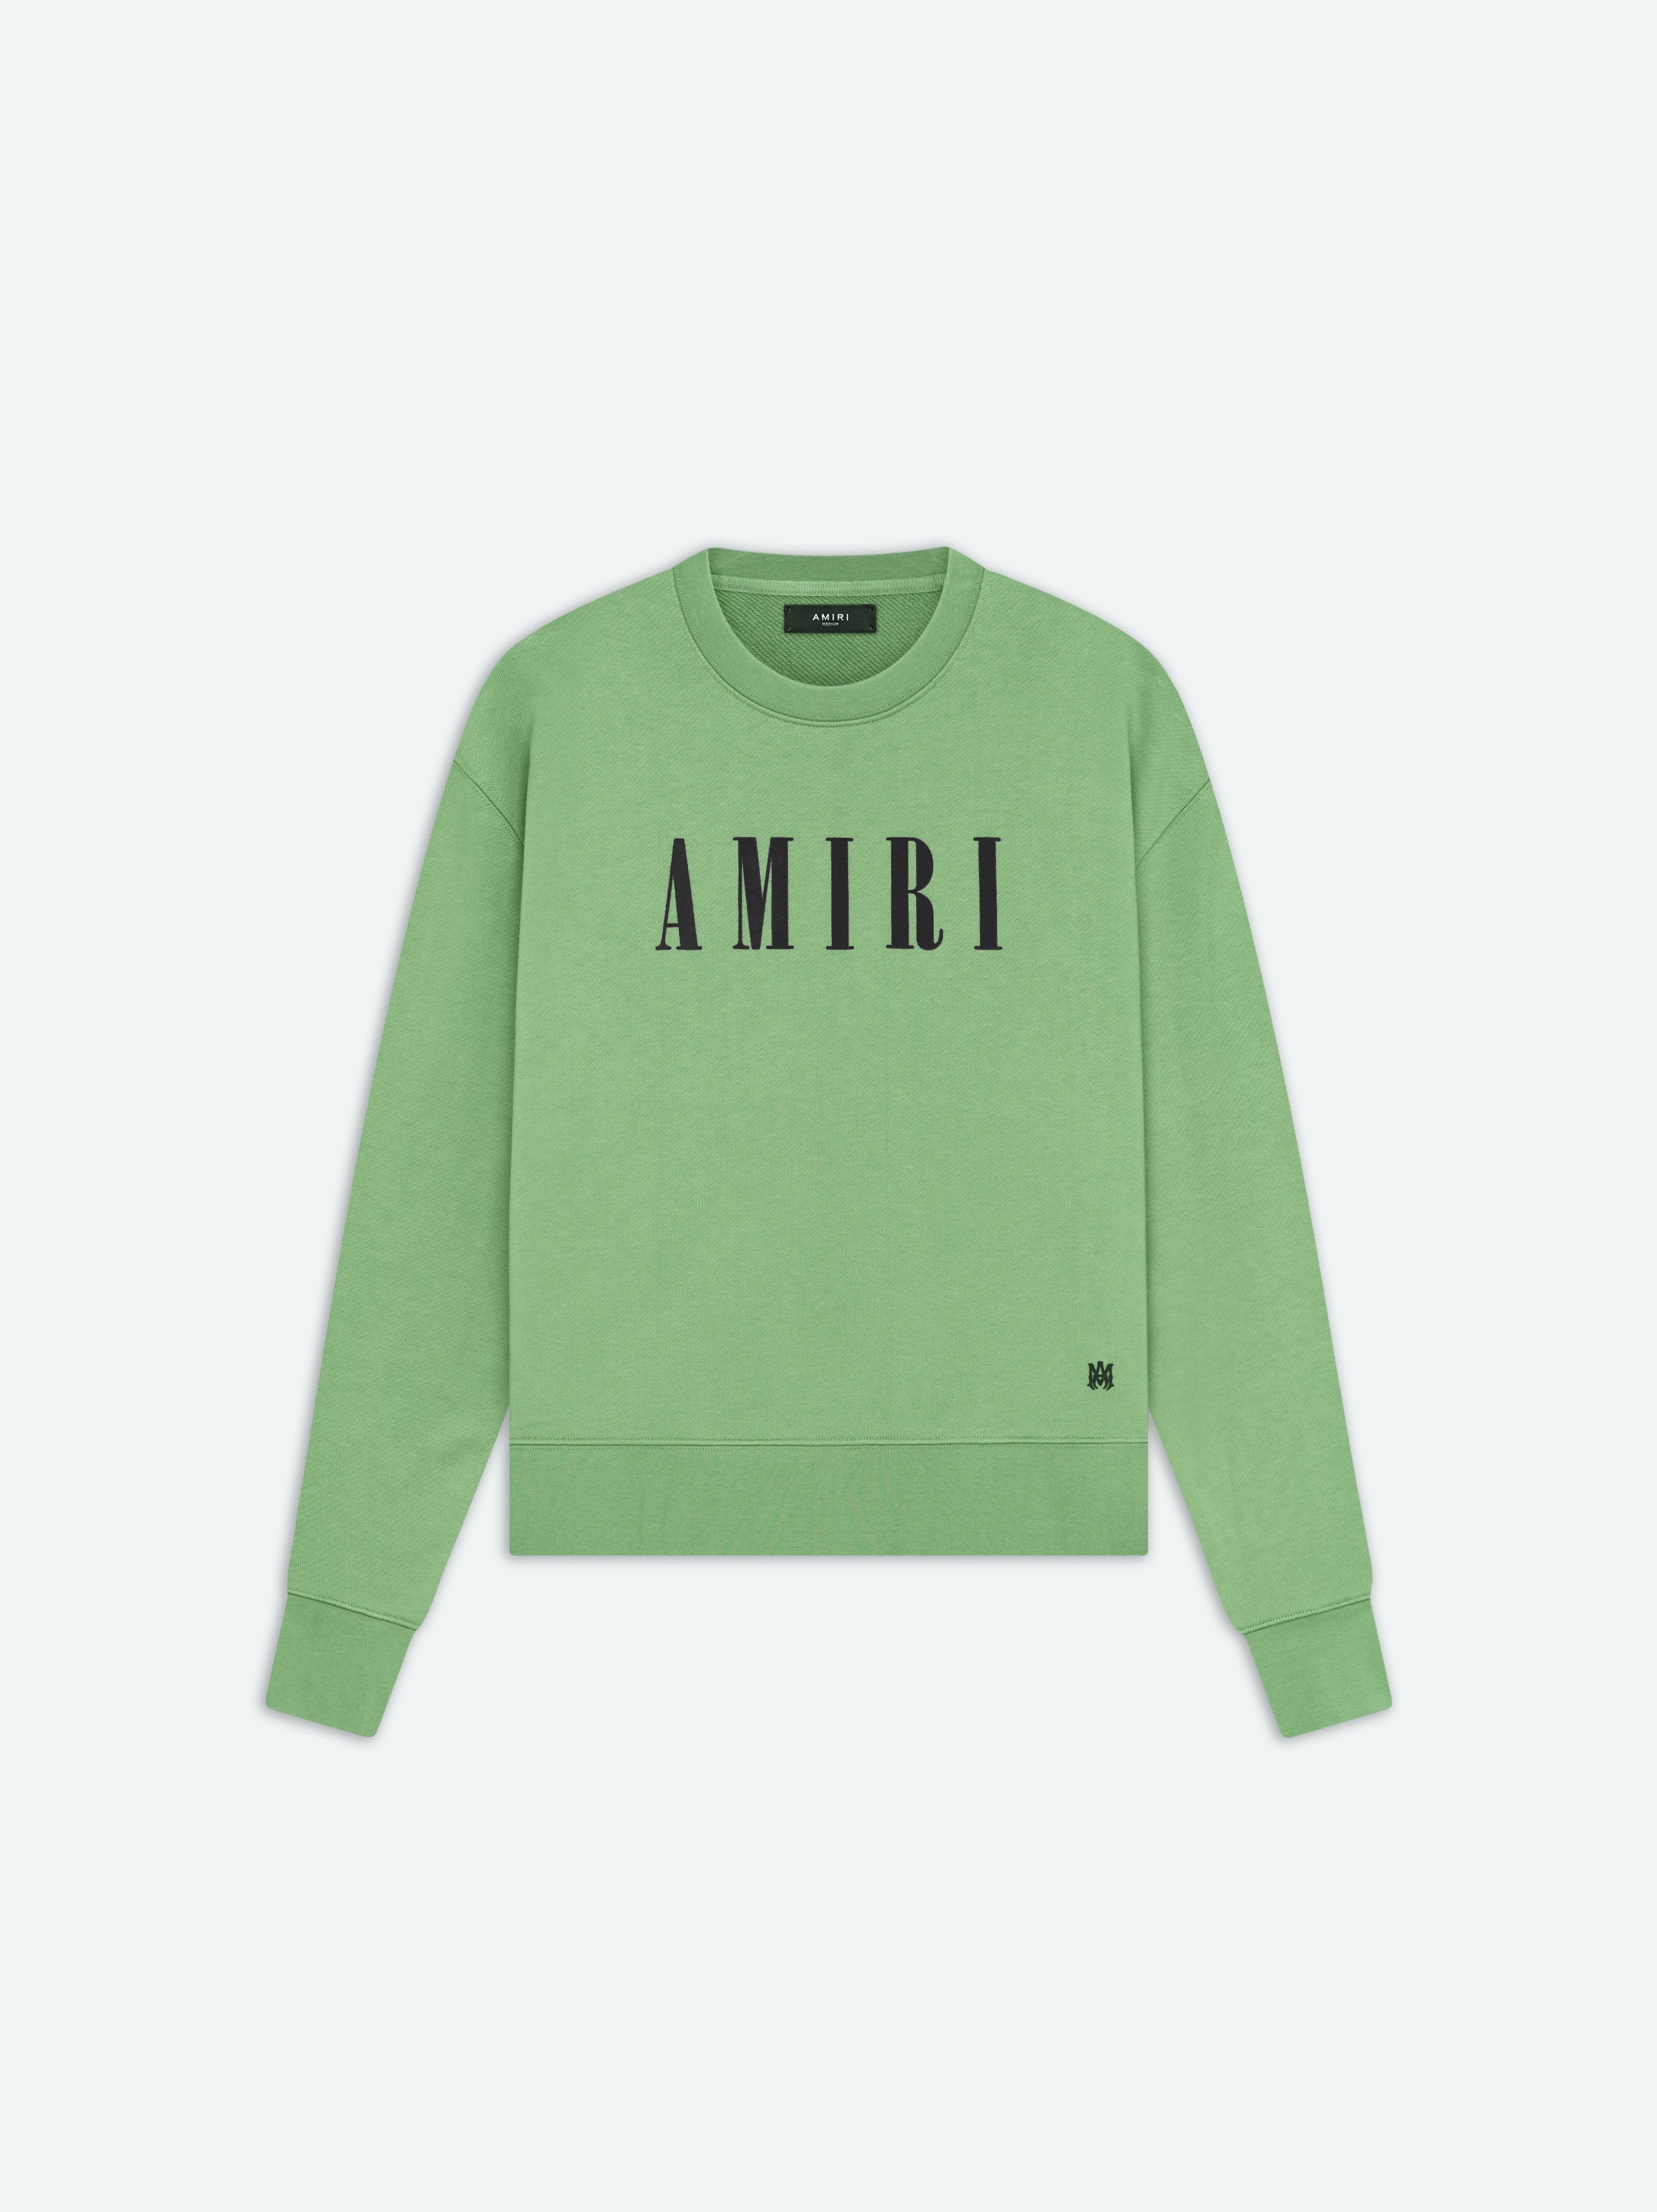 Product AMIRI CORE LOGO CREW - Mineral Green featured image